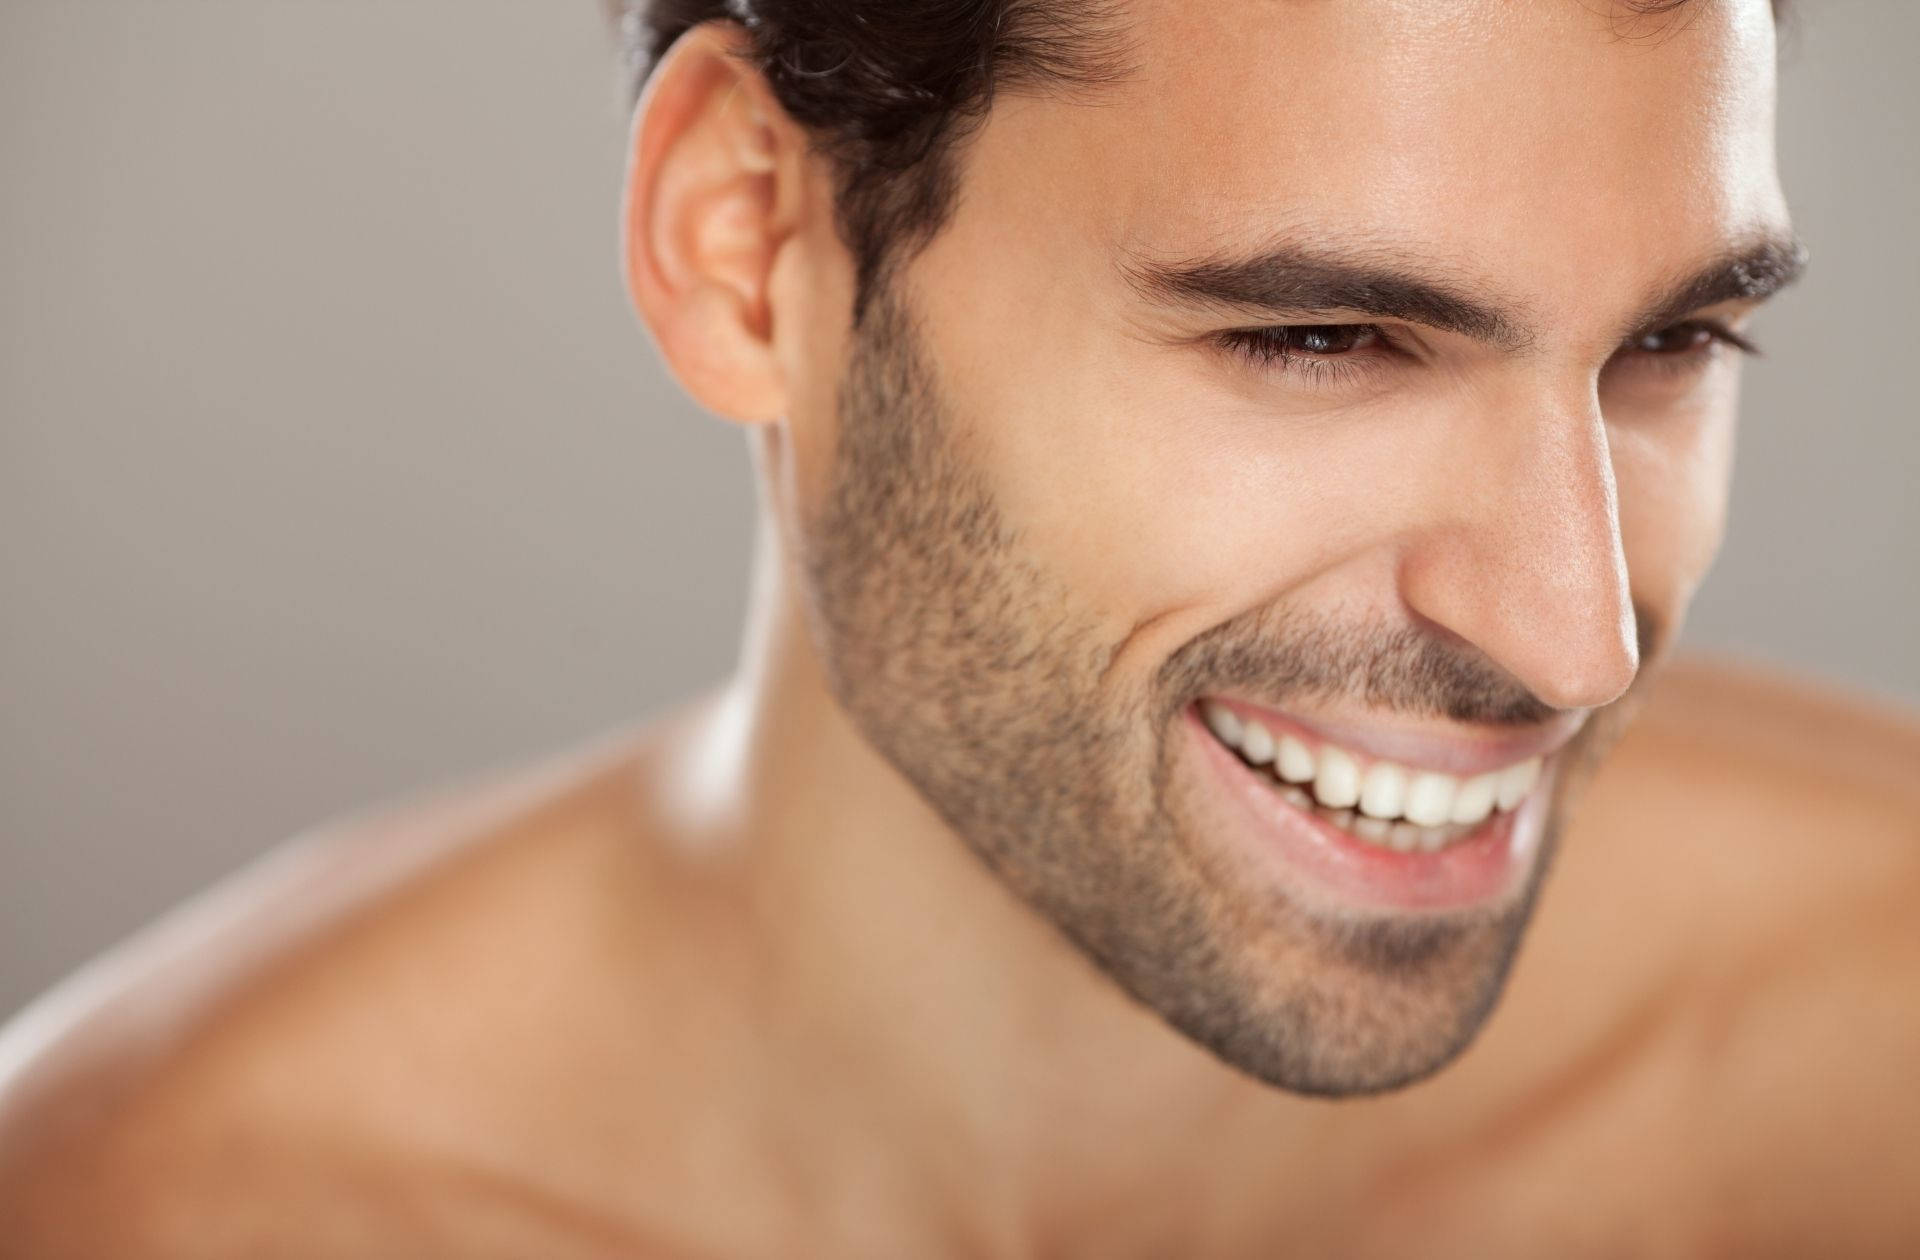 About - Man Smiling - Pure Skin Beauty